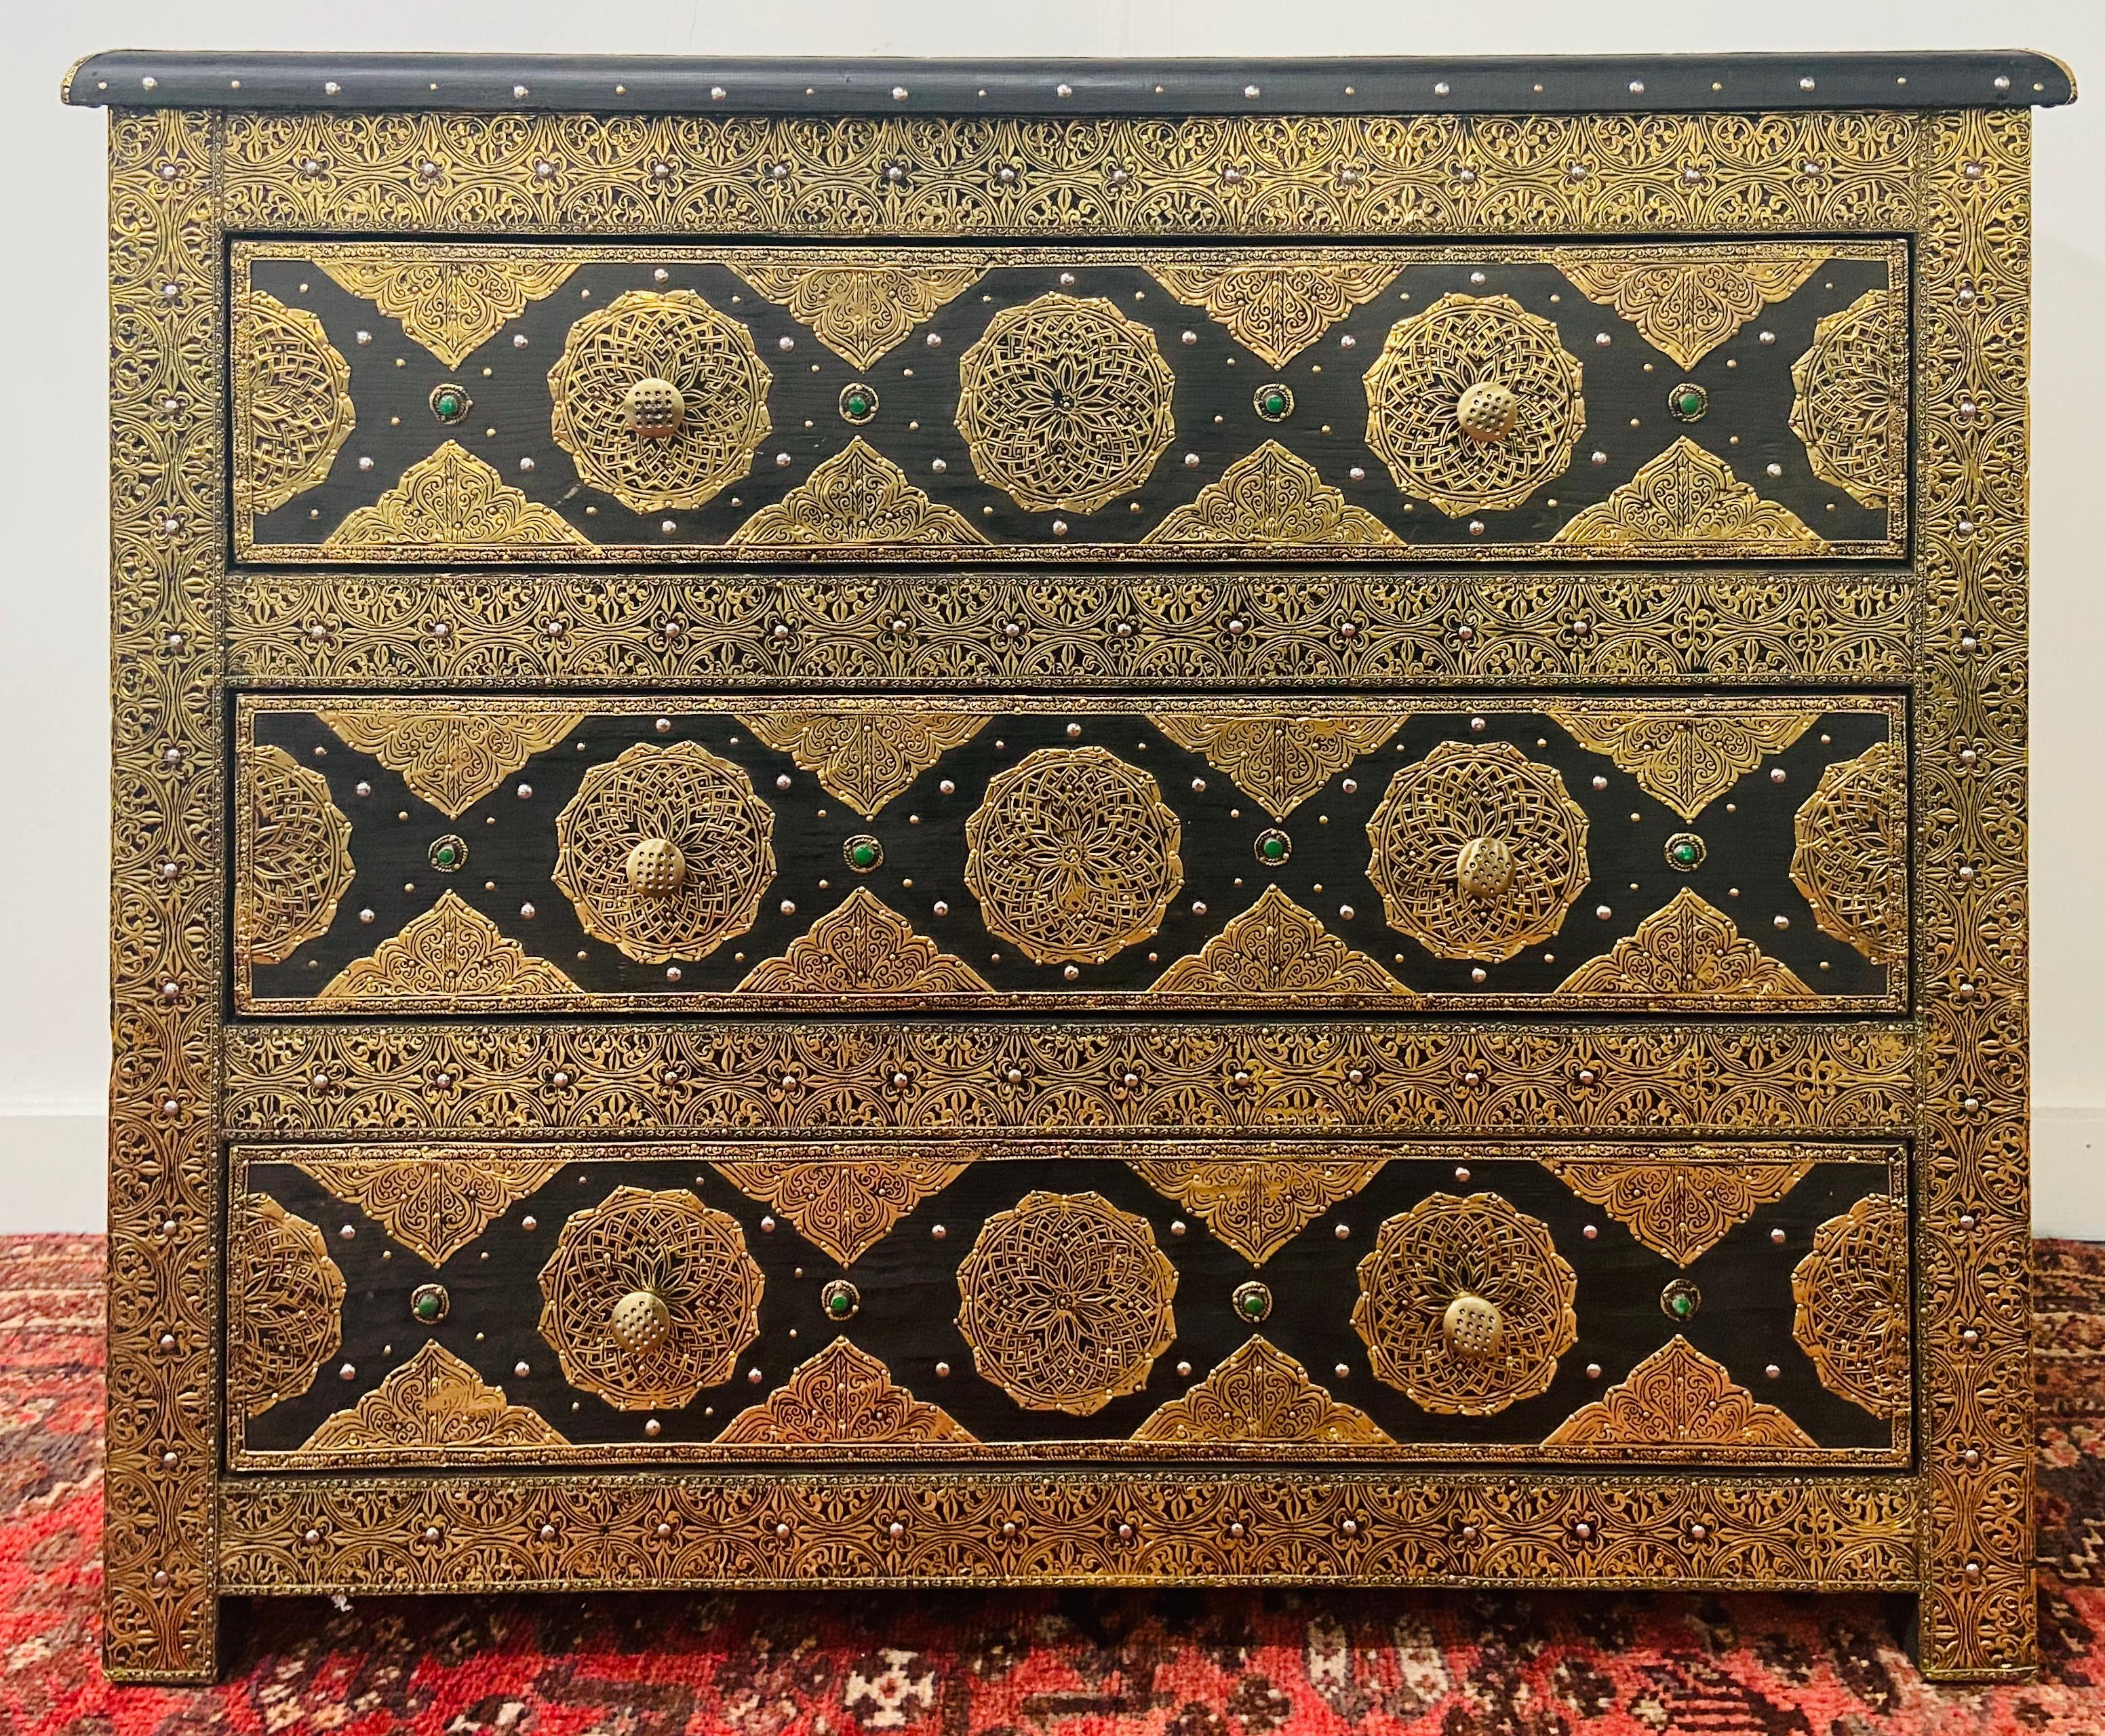 Palatial Hollywood Regency Moroccan commode, chest, nightstand in brass and ebony, a pair

A pair of brass and ebony, natural stone and leather inlaid Hollywood Regency Moroccan commodes, chests or nightstands. These exceptional chests depict and